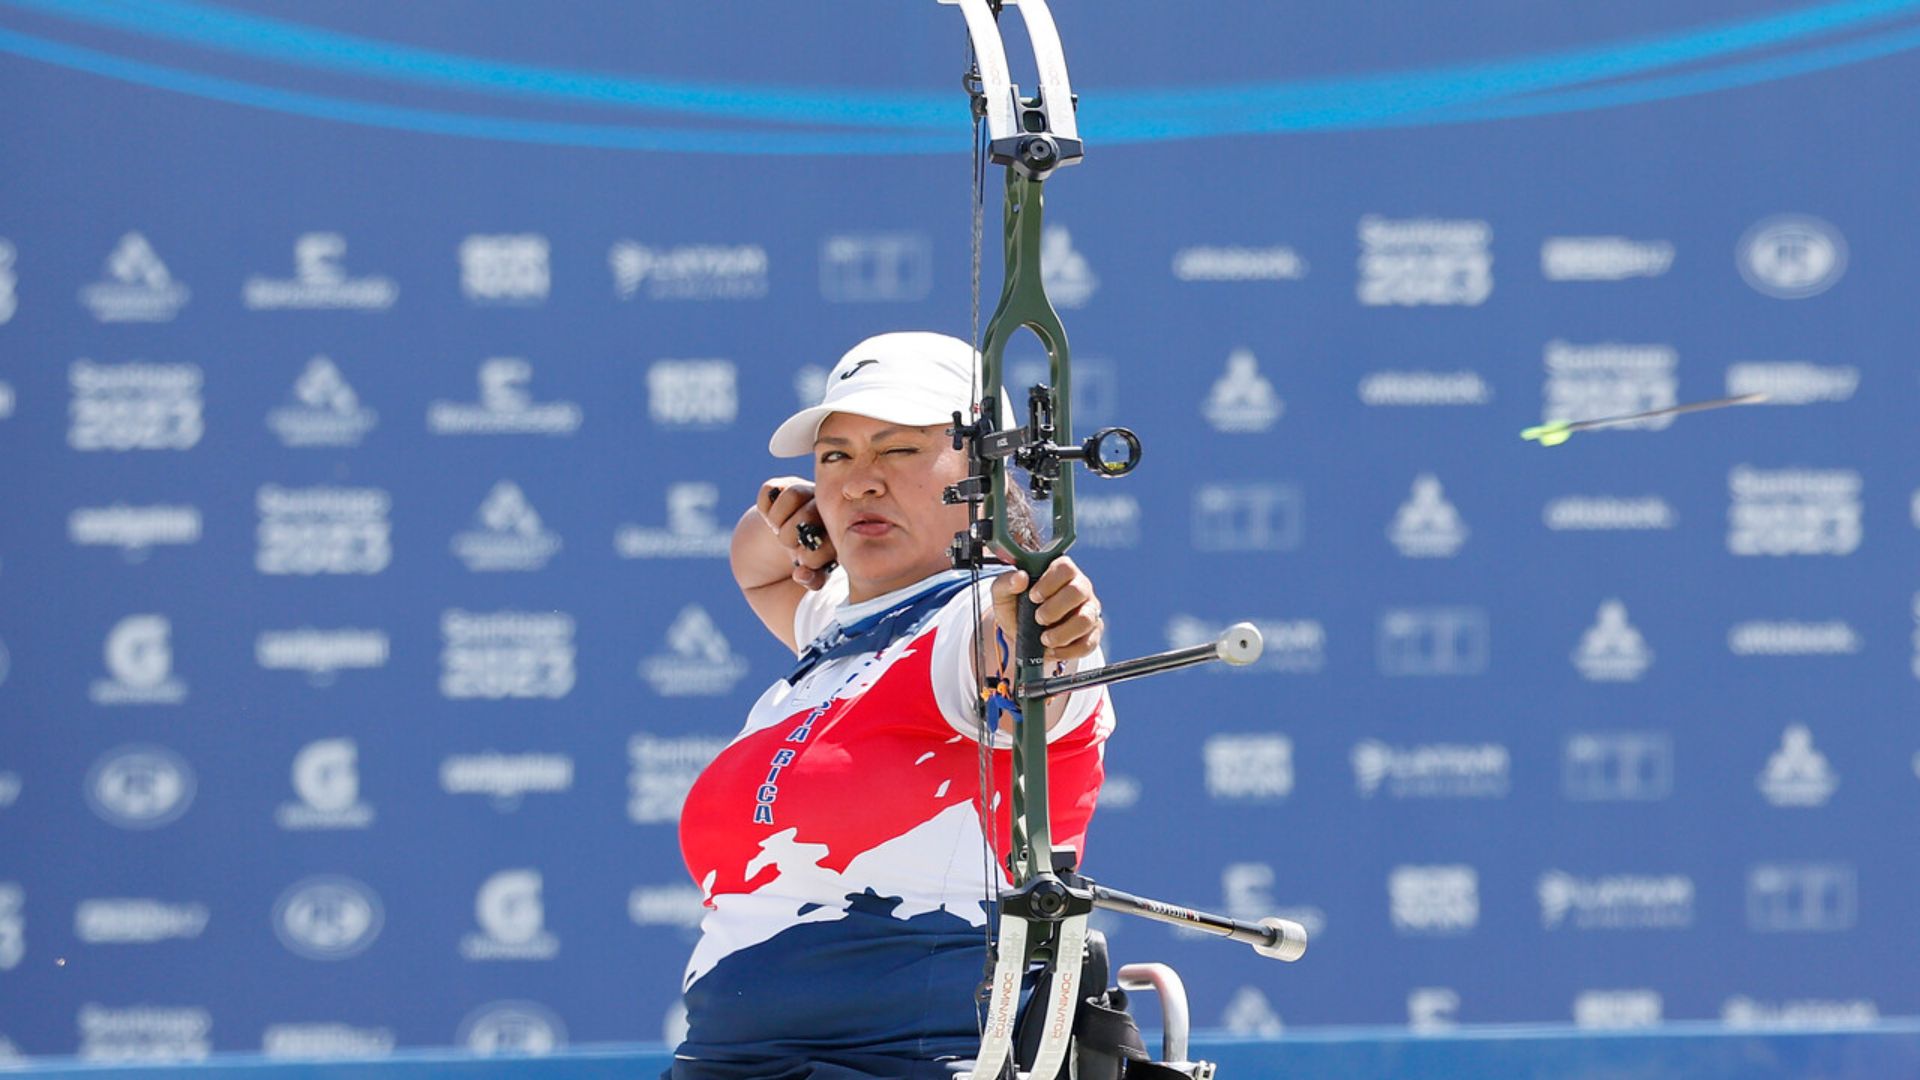 Para Archery: Gold Medal for Costa Rica in Female's Category